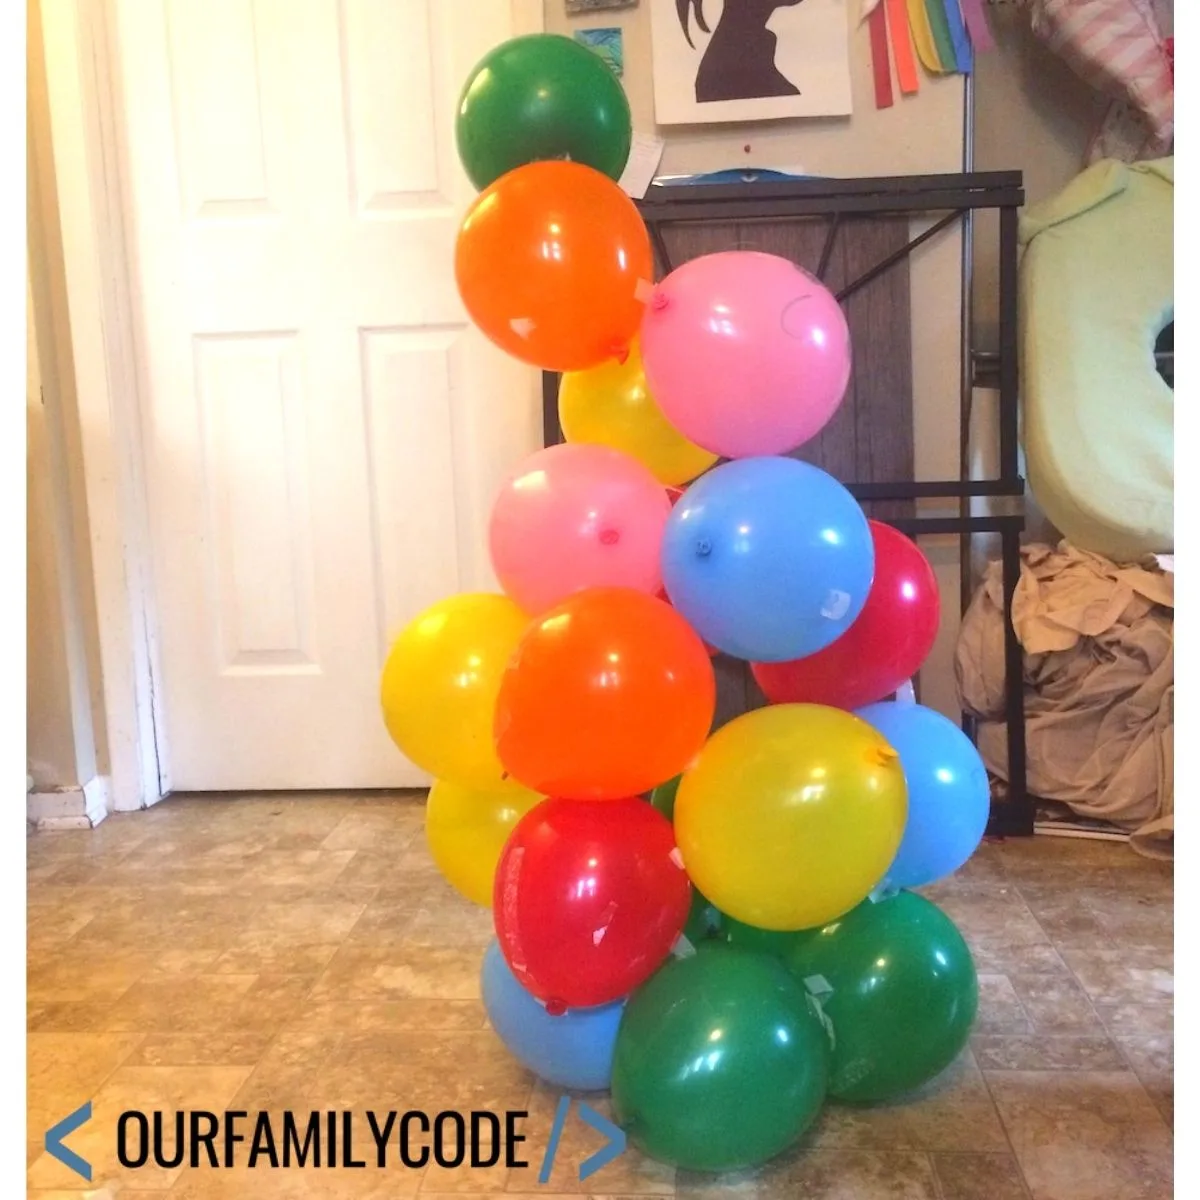 A picture of a balloon tower made with tape and balloons.